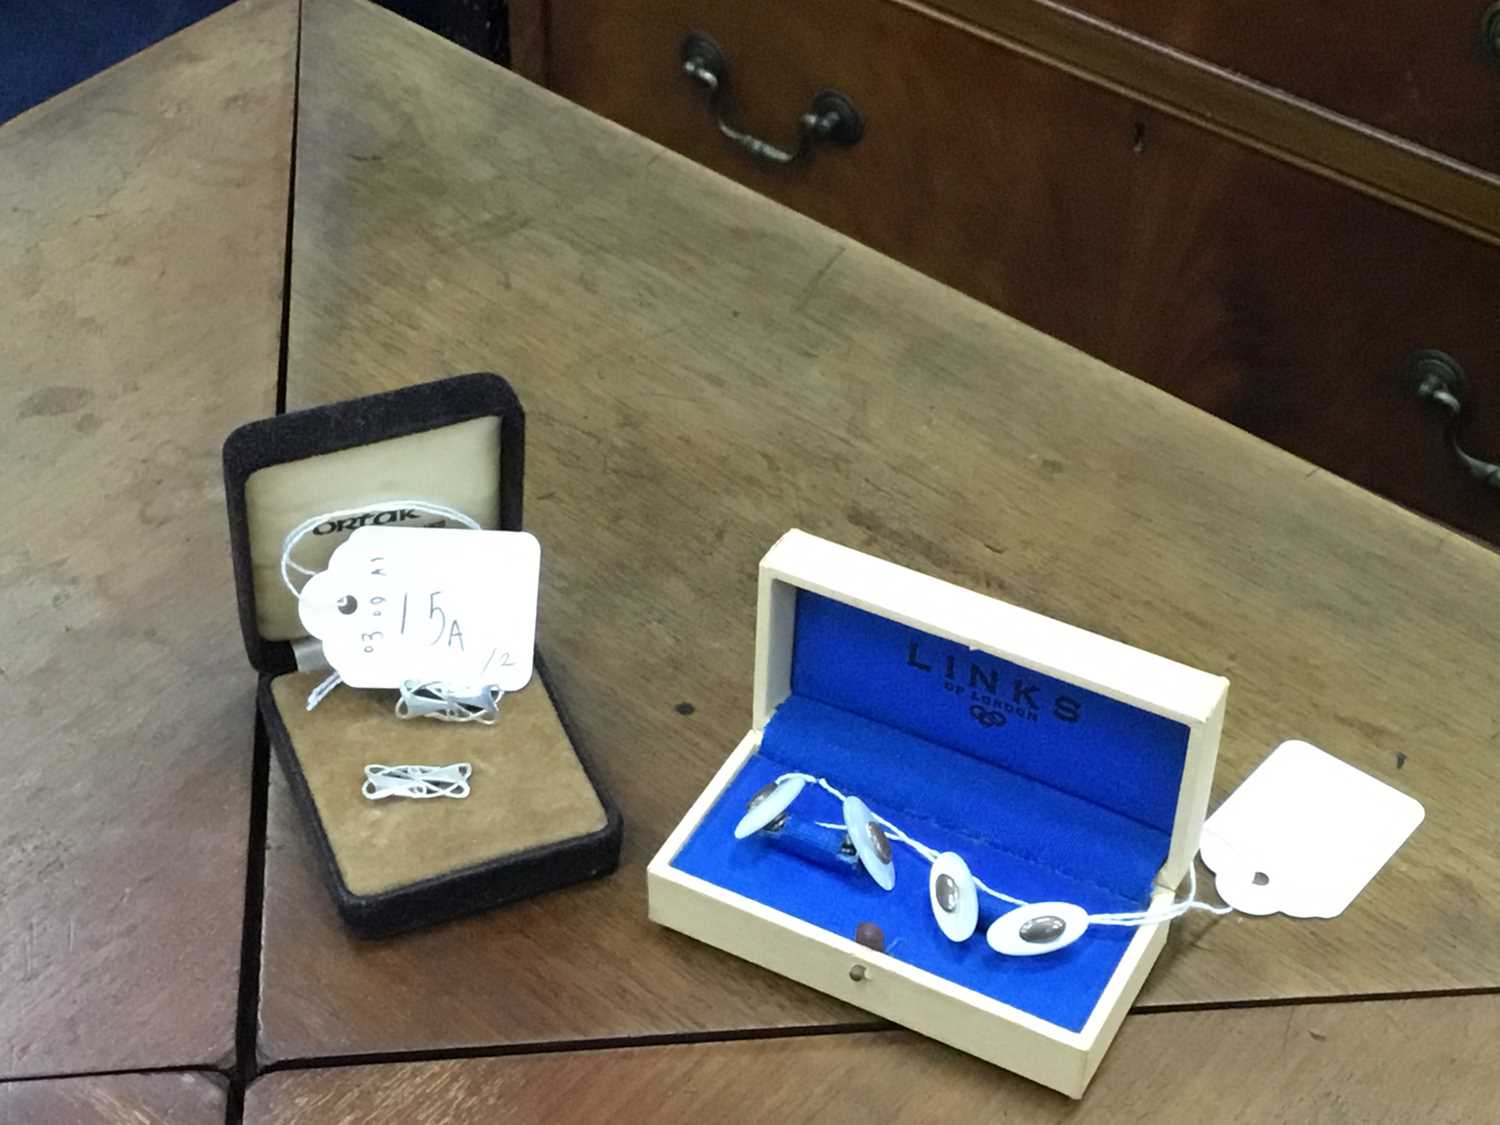 Lot 15 - A PAIR OF LINKS OF LONDON SILVER AND MOTHER OF PEARL CUFFLINKS ALONG WITH ANOTHER PAIR OF CUFFLINKS